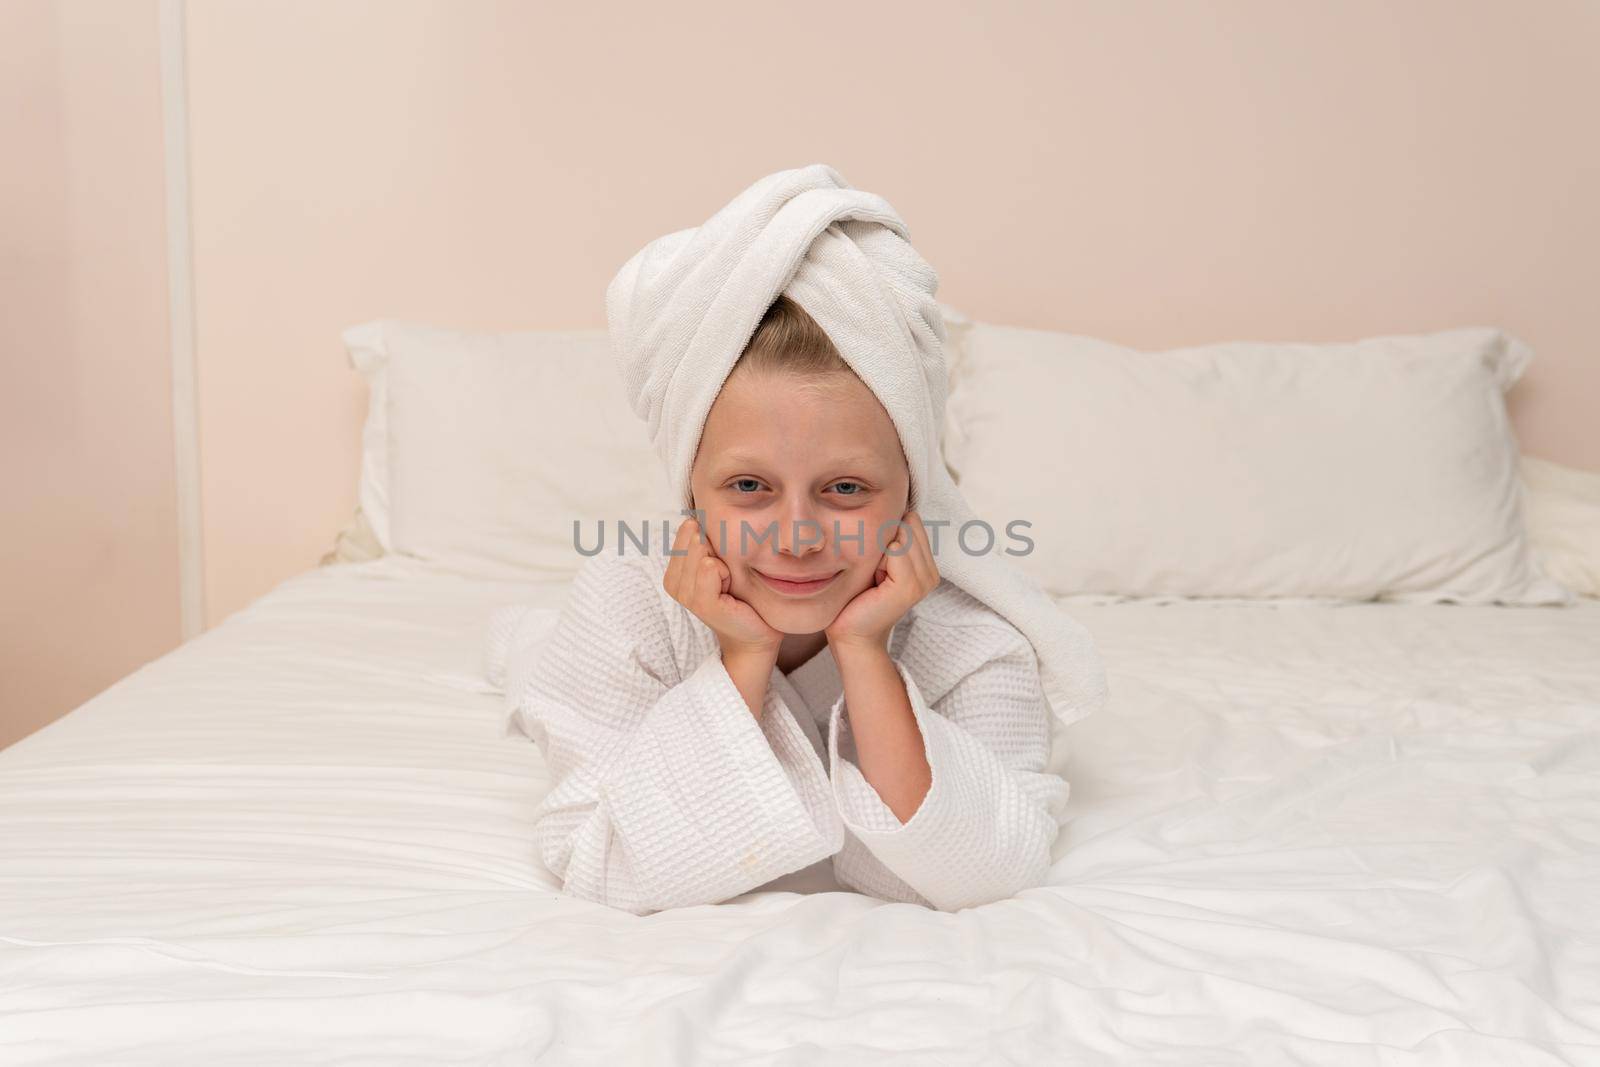 Elbows coffee smile copyspace Creek bathrobe bed girl portrait morning, from lifestyle dressing in young for beautiful style, pirate background. Care kid fashion,